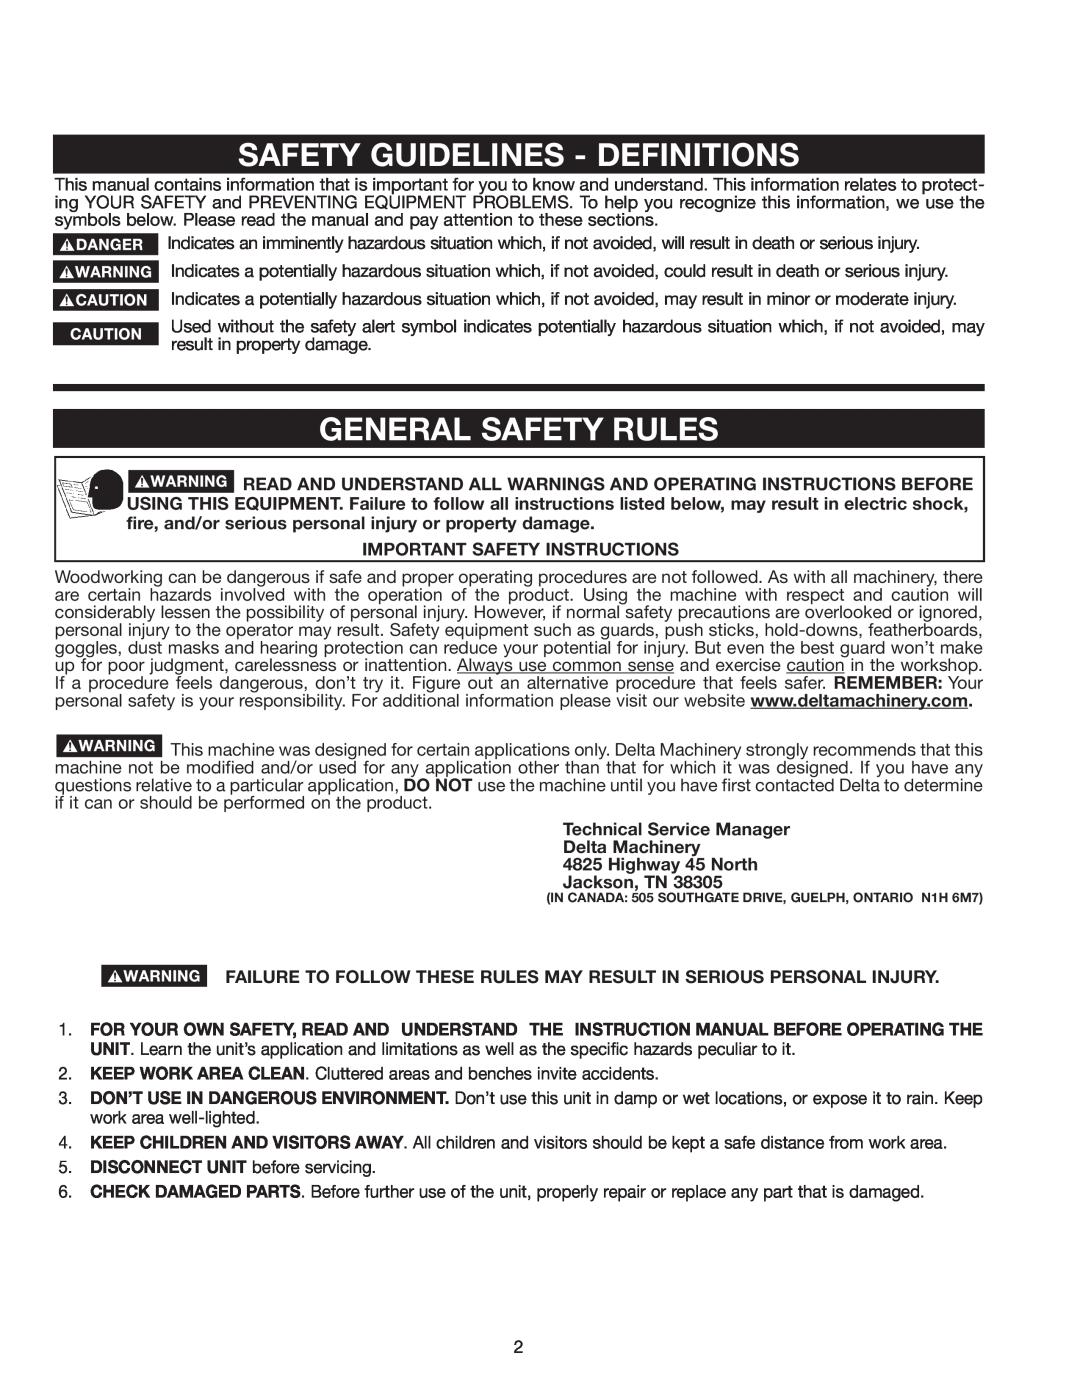 Delta 50-875 instruction manual Safety Guidelines - Definitions, General Safety Rules, Important Safety Instructions 